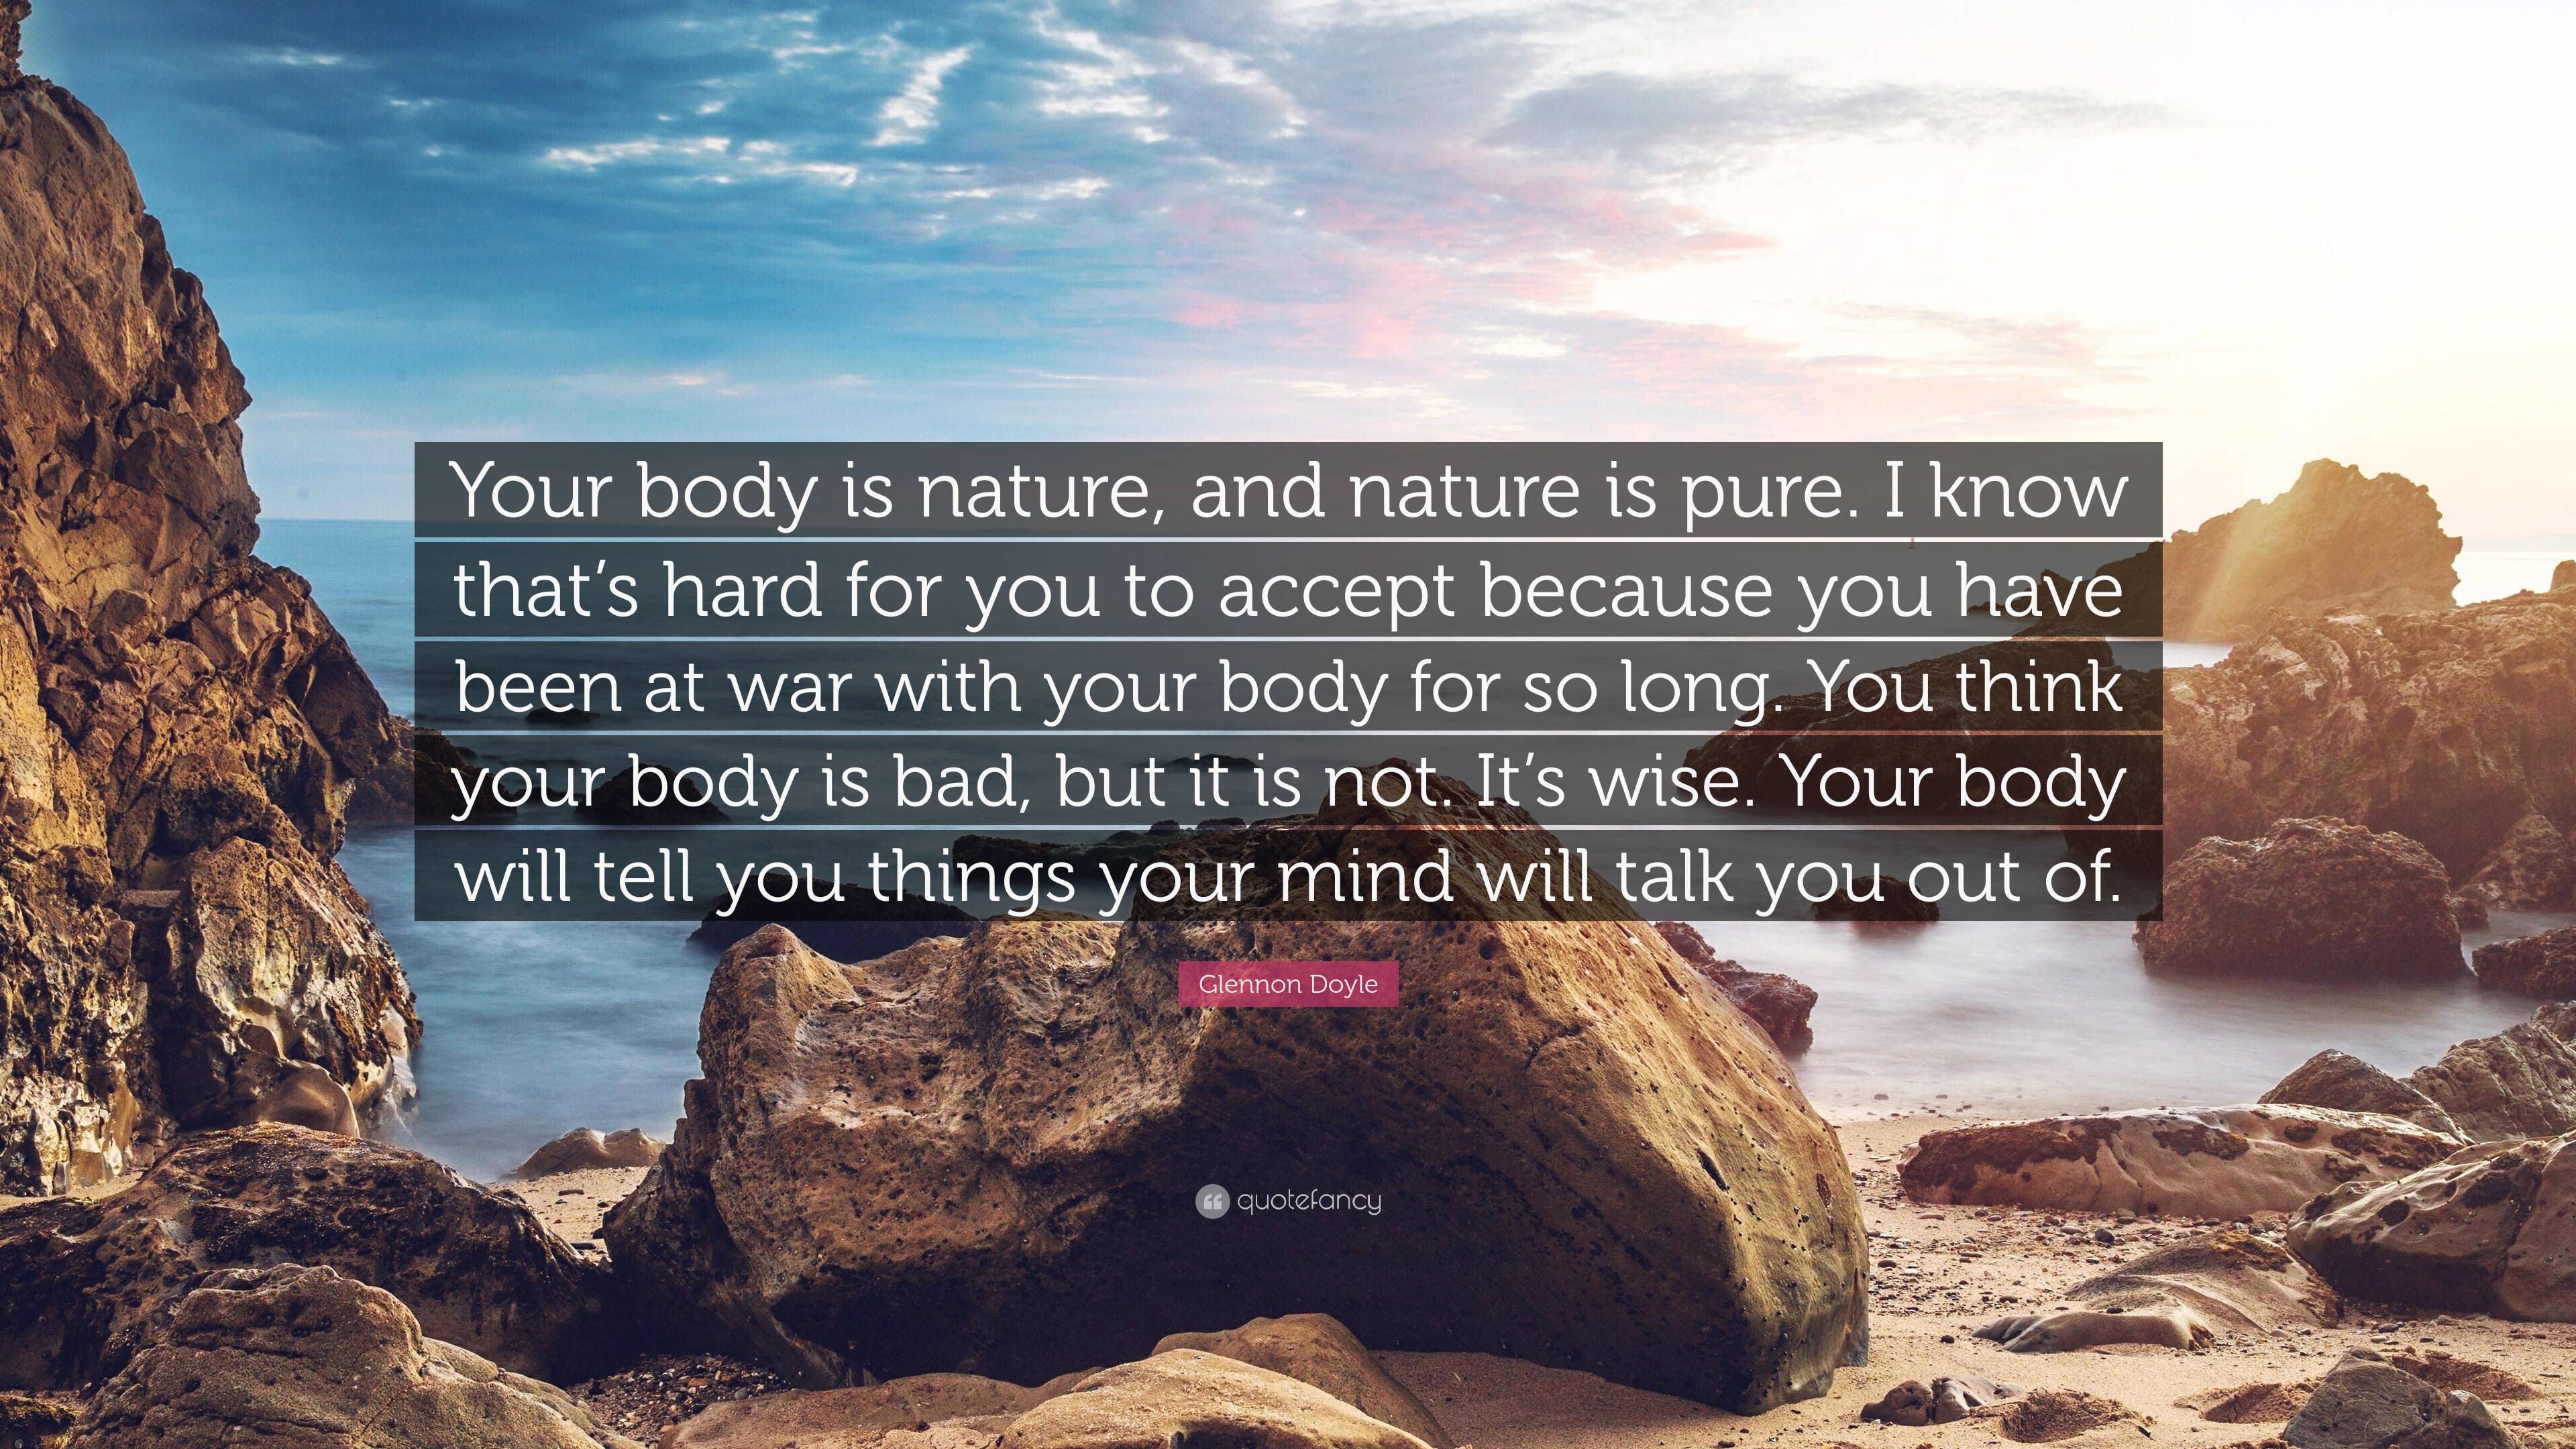 Glennon Doyle Quote: “Your body is nature, and nature is pure. I